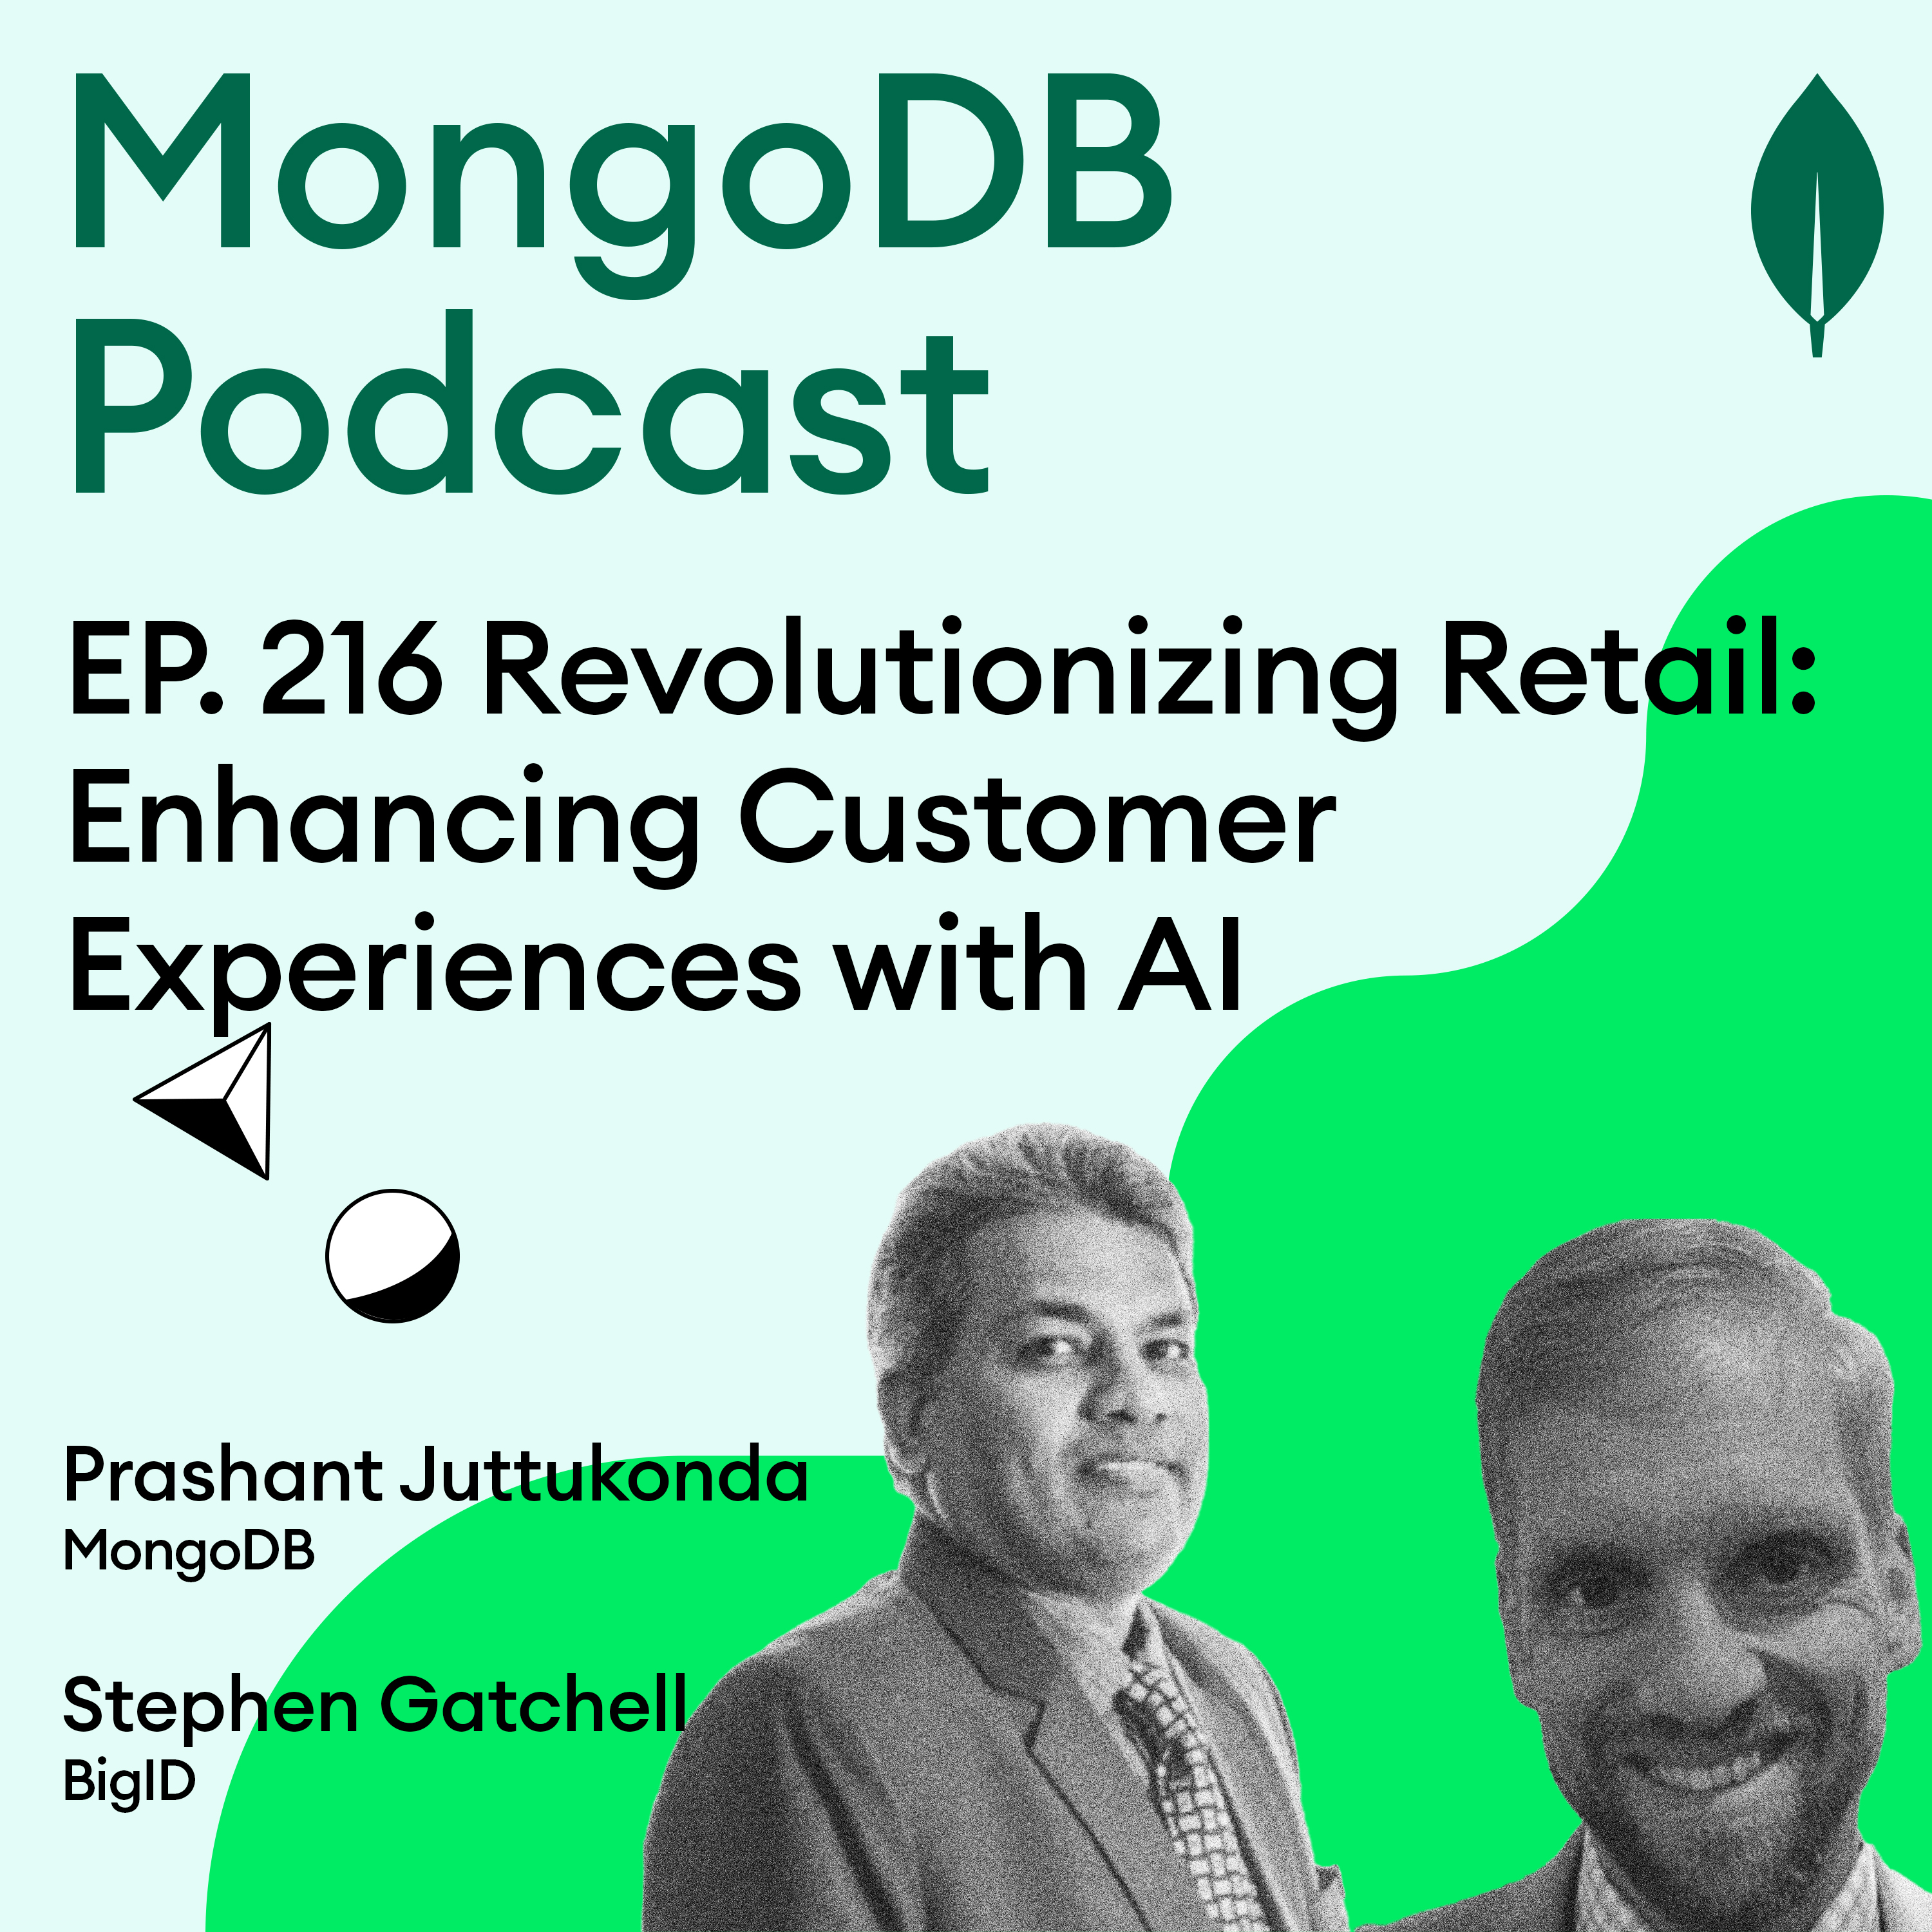 EP. 216 Revolutionizing Retail: Enhancing Customer Experiences with AI